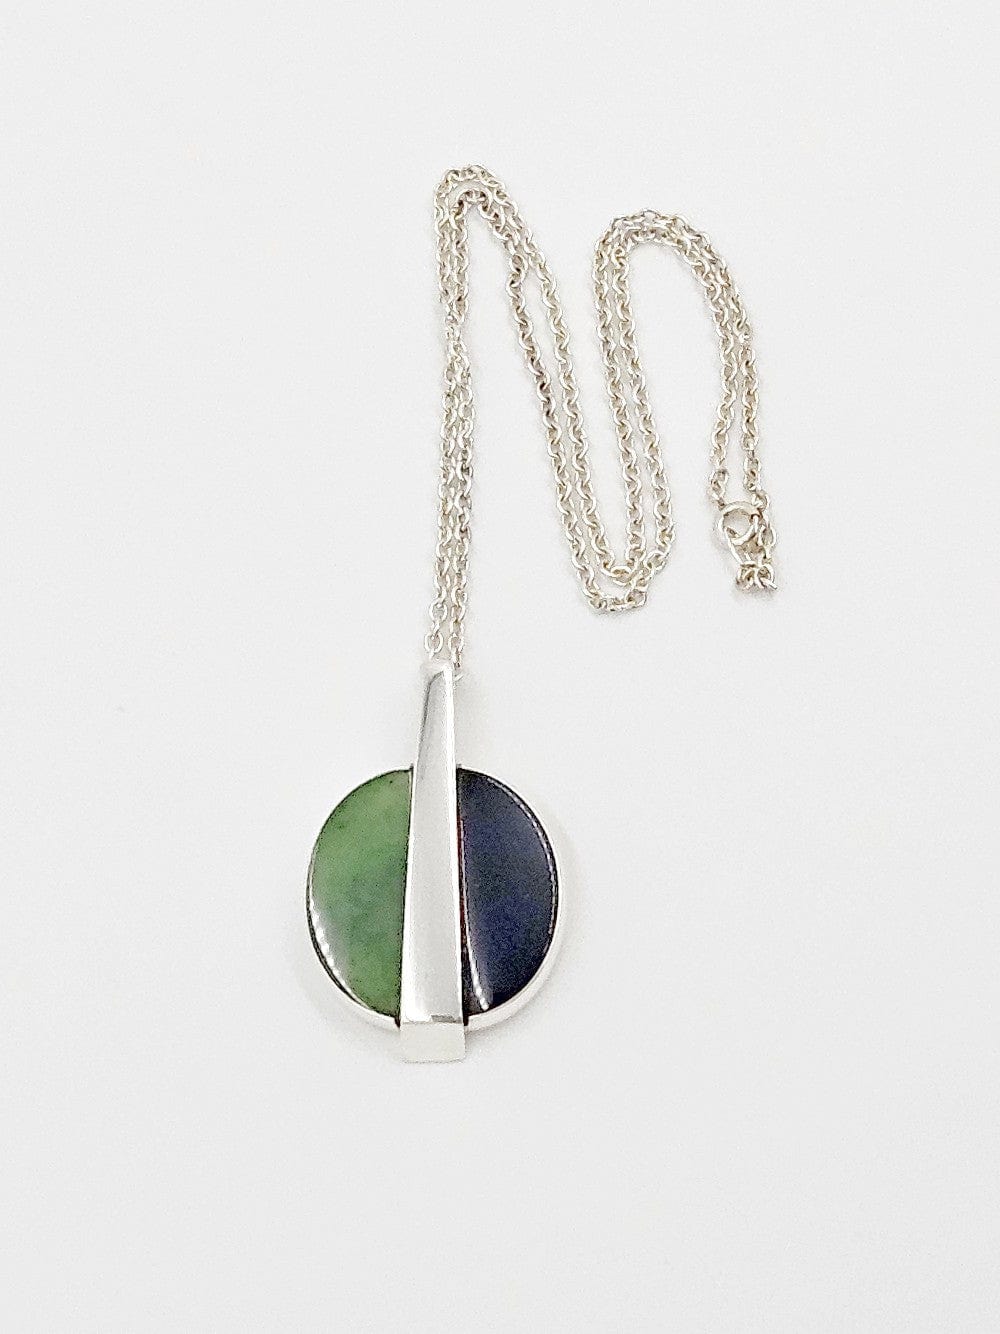 Niels Erik From Jewelry Niels Erik From Denmark Sterling Onyx Nephrite Modernist Necklace C. 1960s